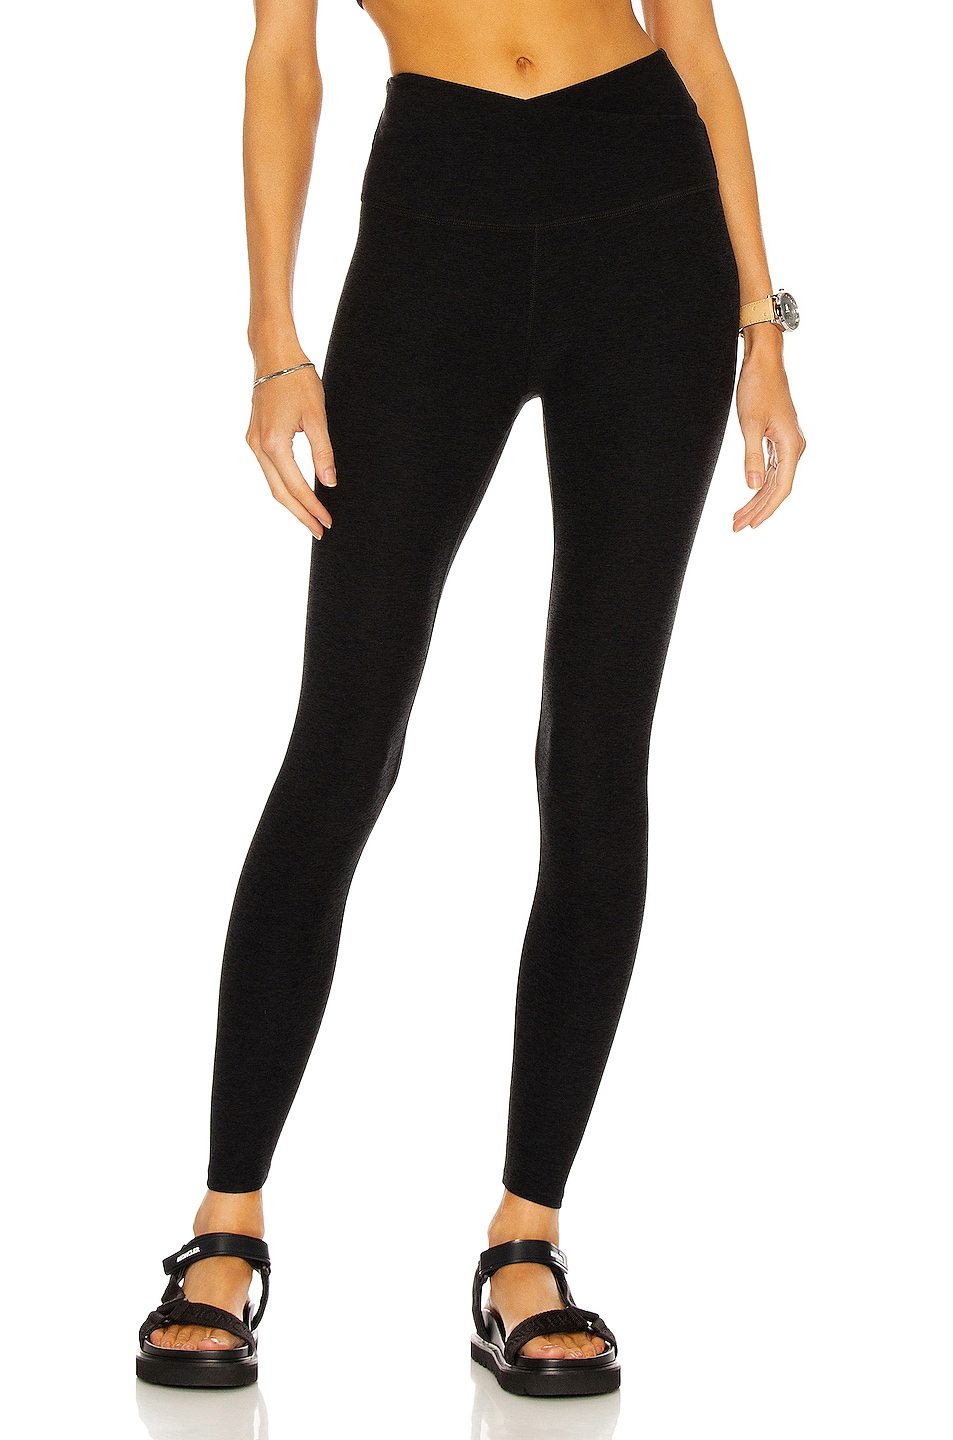 At Your Leisure Legging in Black